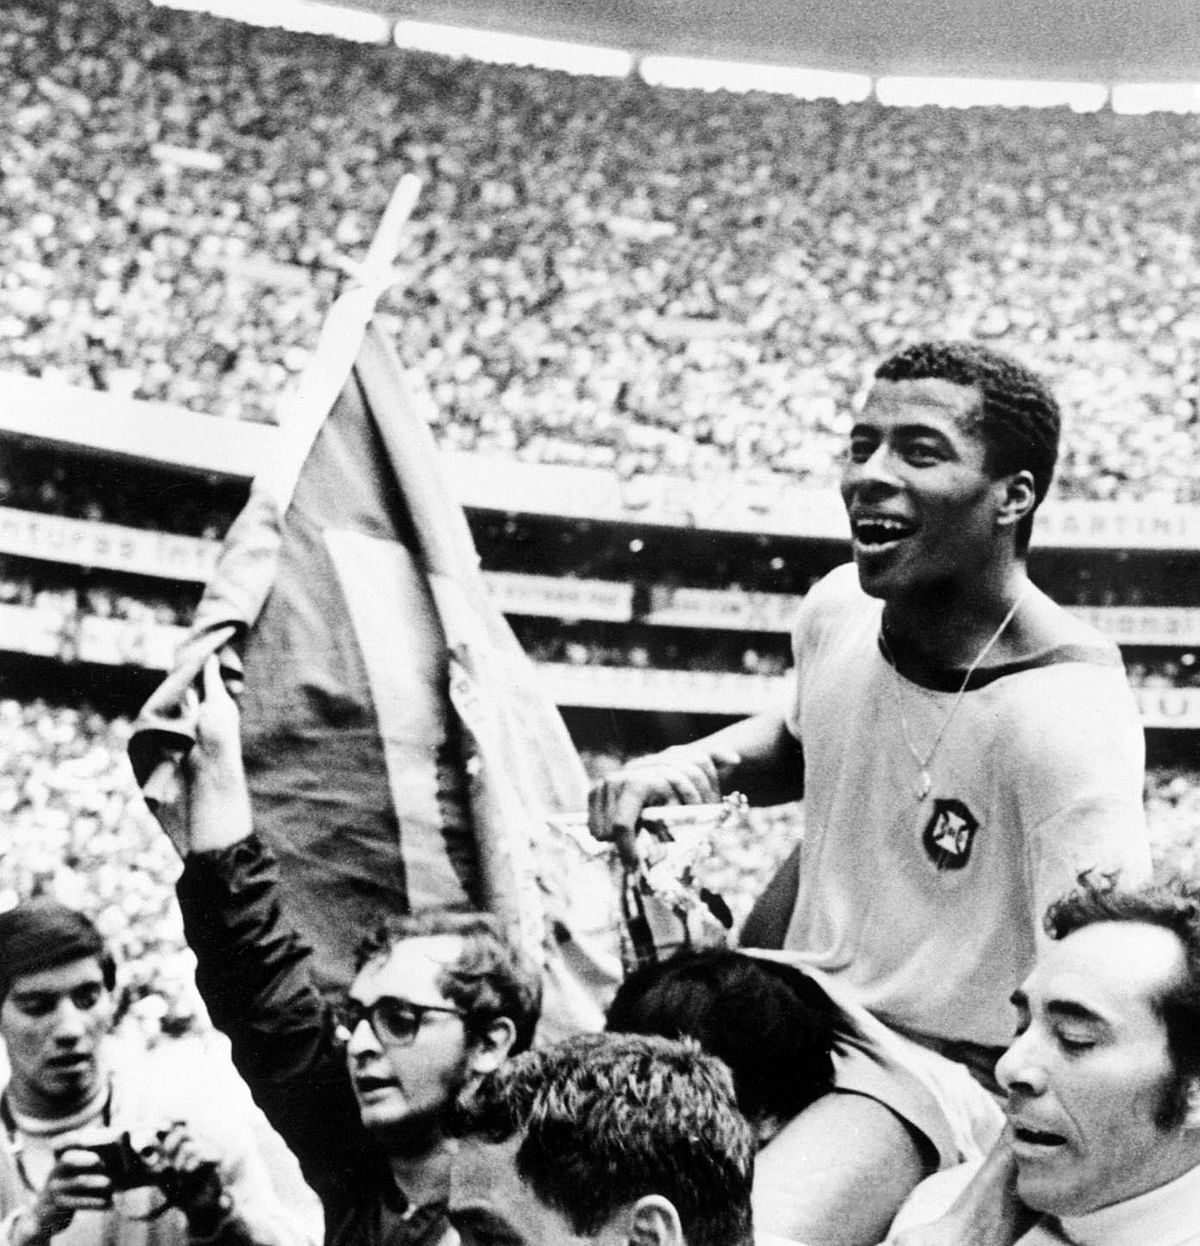 Brazilian forward Jairzinho is carried by fans after Brazil defeated Italy 4-1 in the World Cup final on 21 June 1970 in Mexico City. It is Brazil's third World title after the first two won in 1958 in Sweden and 1962 in Chile. Photo: AFP